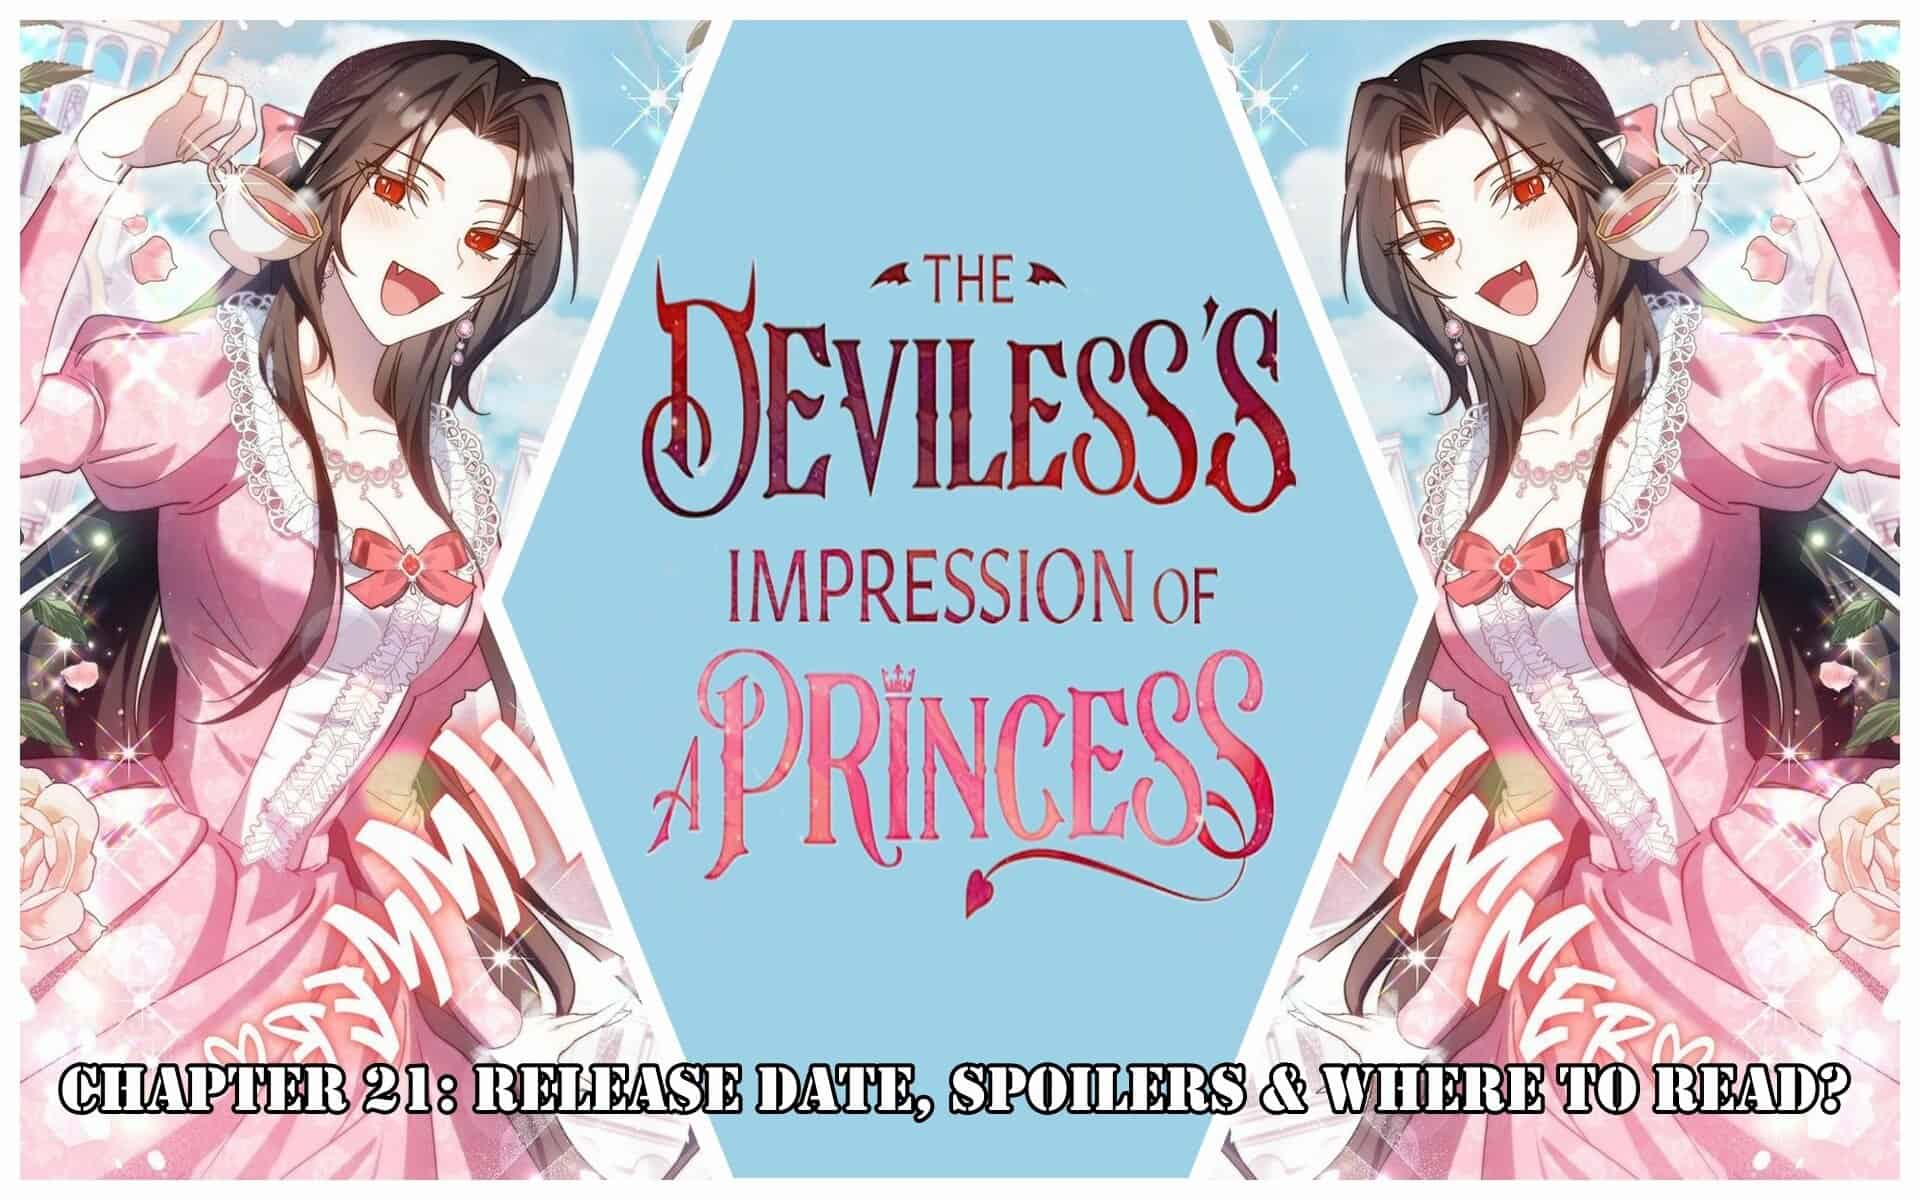 The Deviless’s Impression Of A Princess Chapter 21: Release Date, Spoilers & Where to Read?